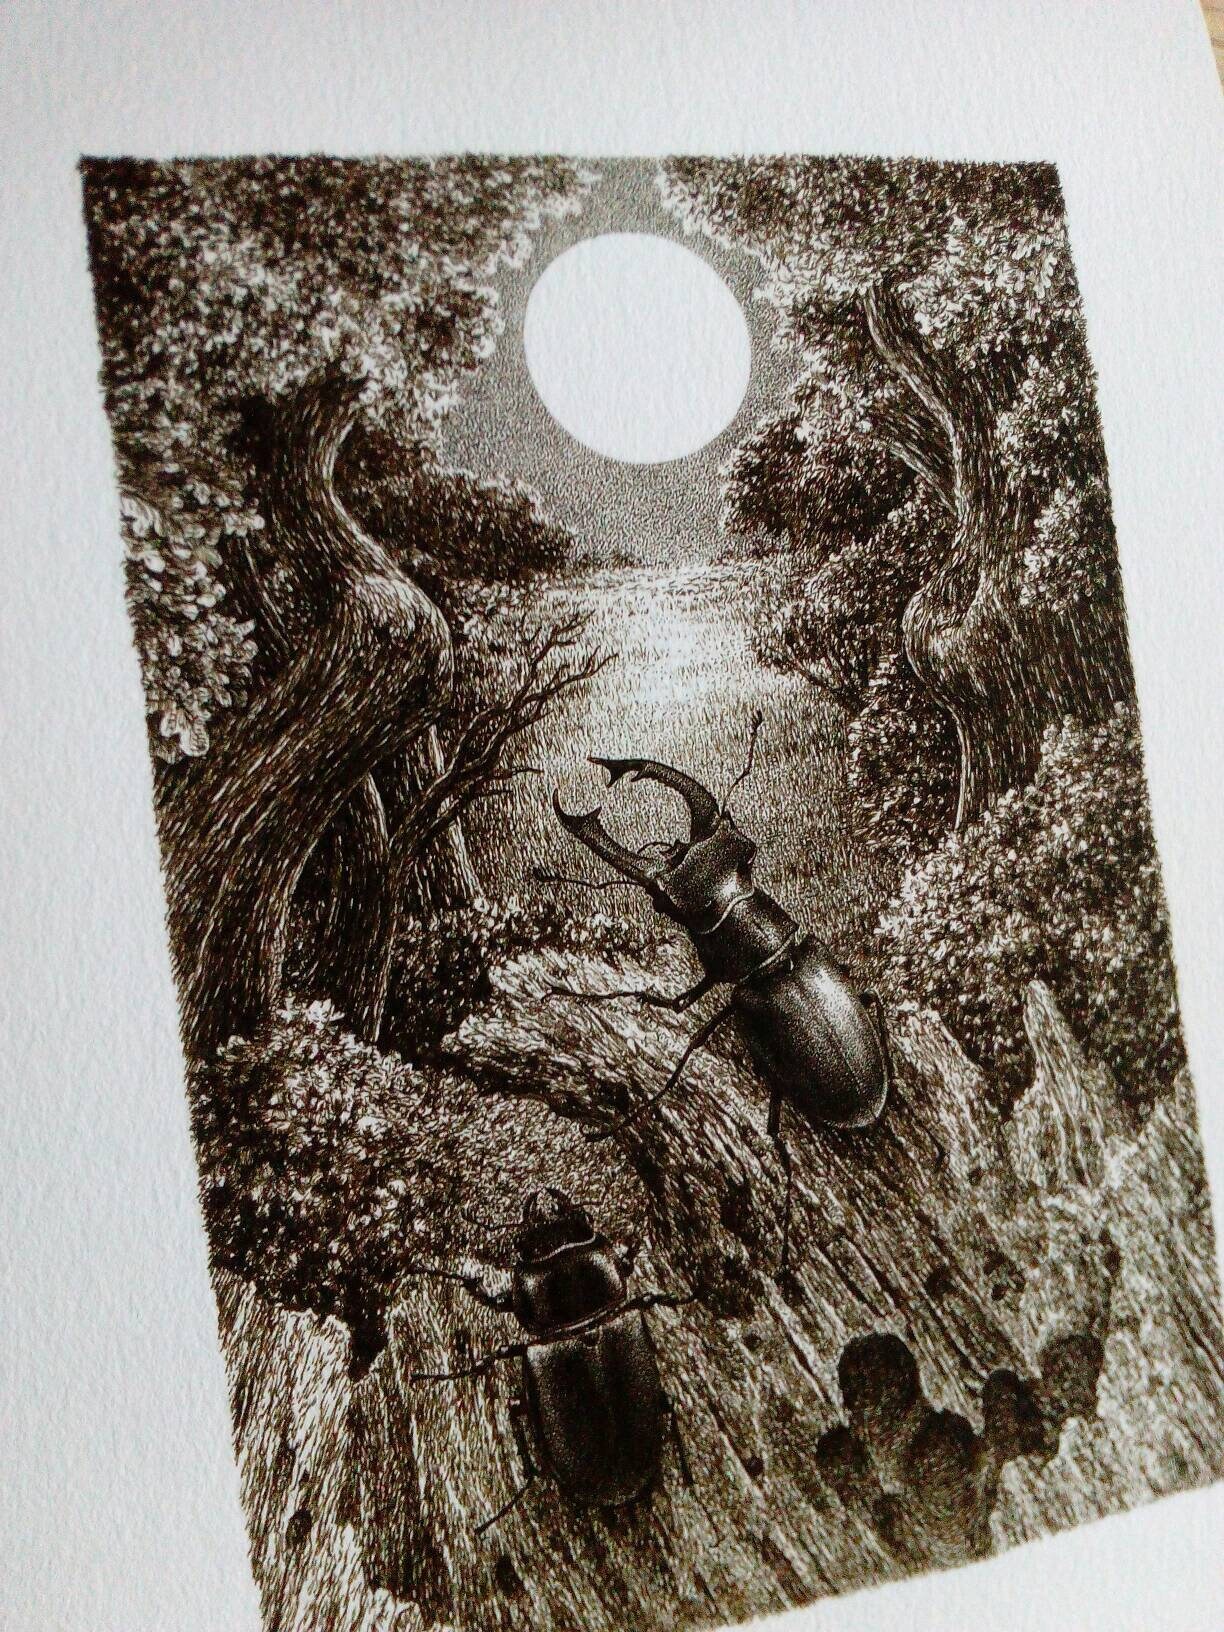 A4 sized print - Stag Beetles & Full Moon, limited edition